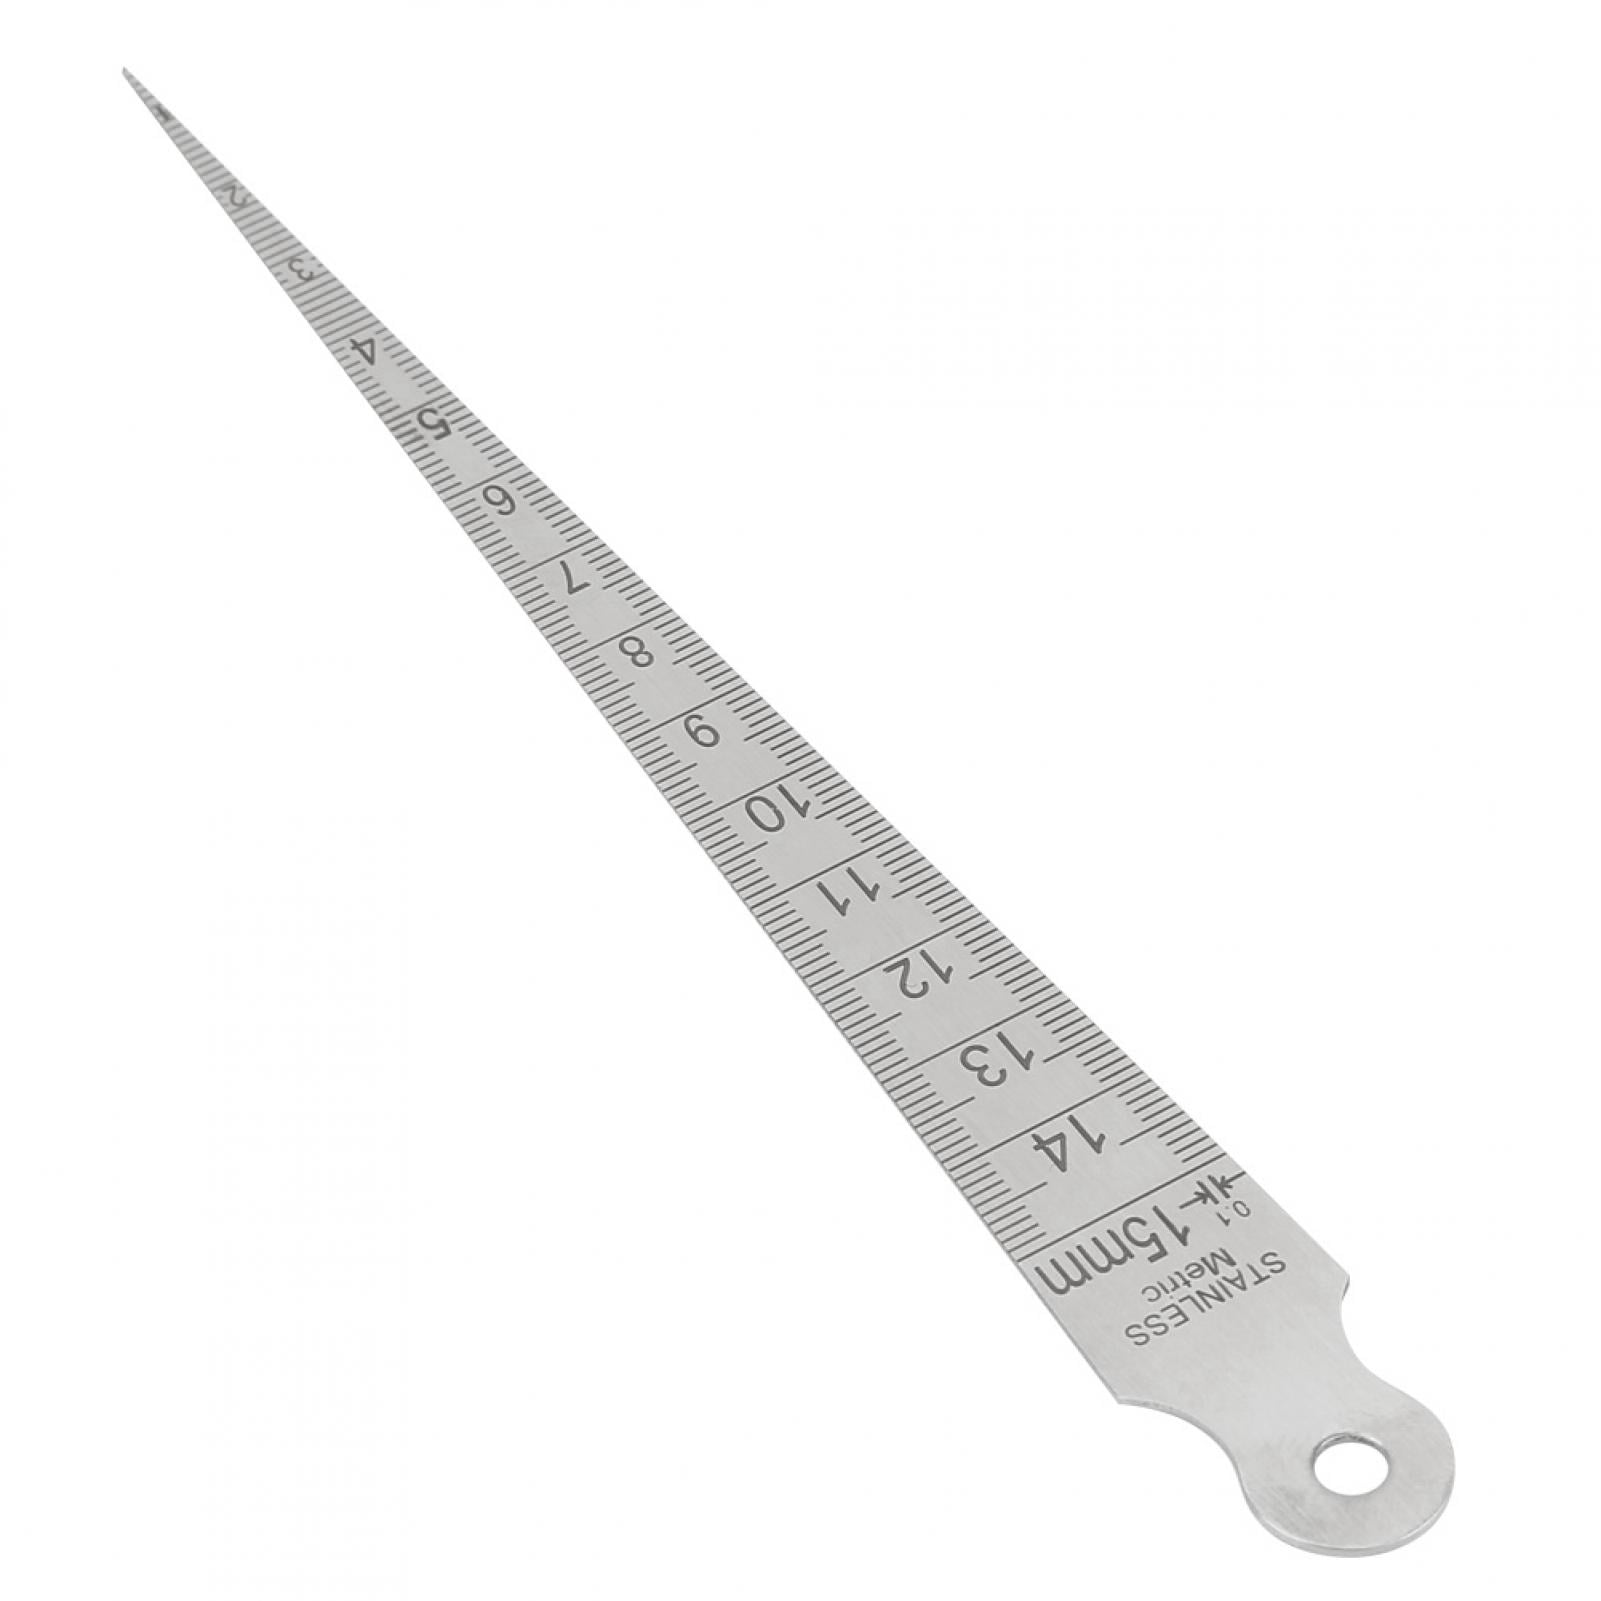 Marked Bore Gauge Guide Imperial and Metric Graduations Drill Hole Size Finder 